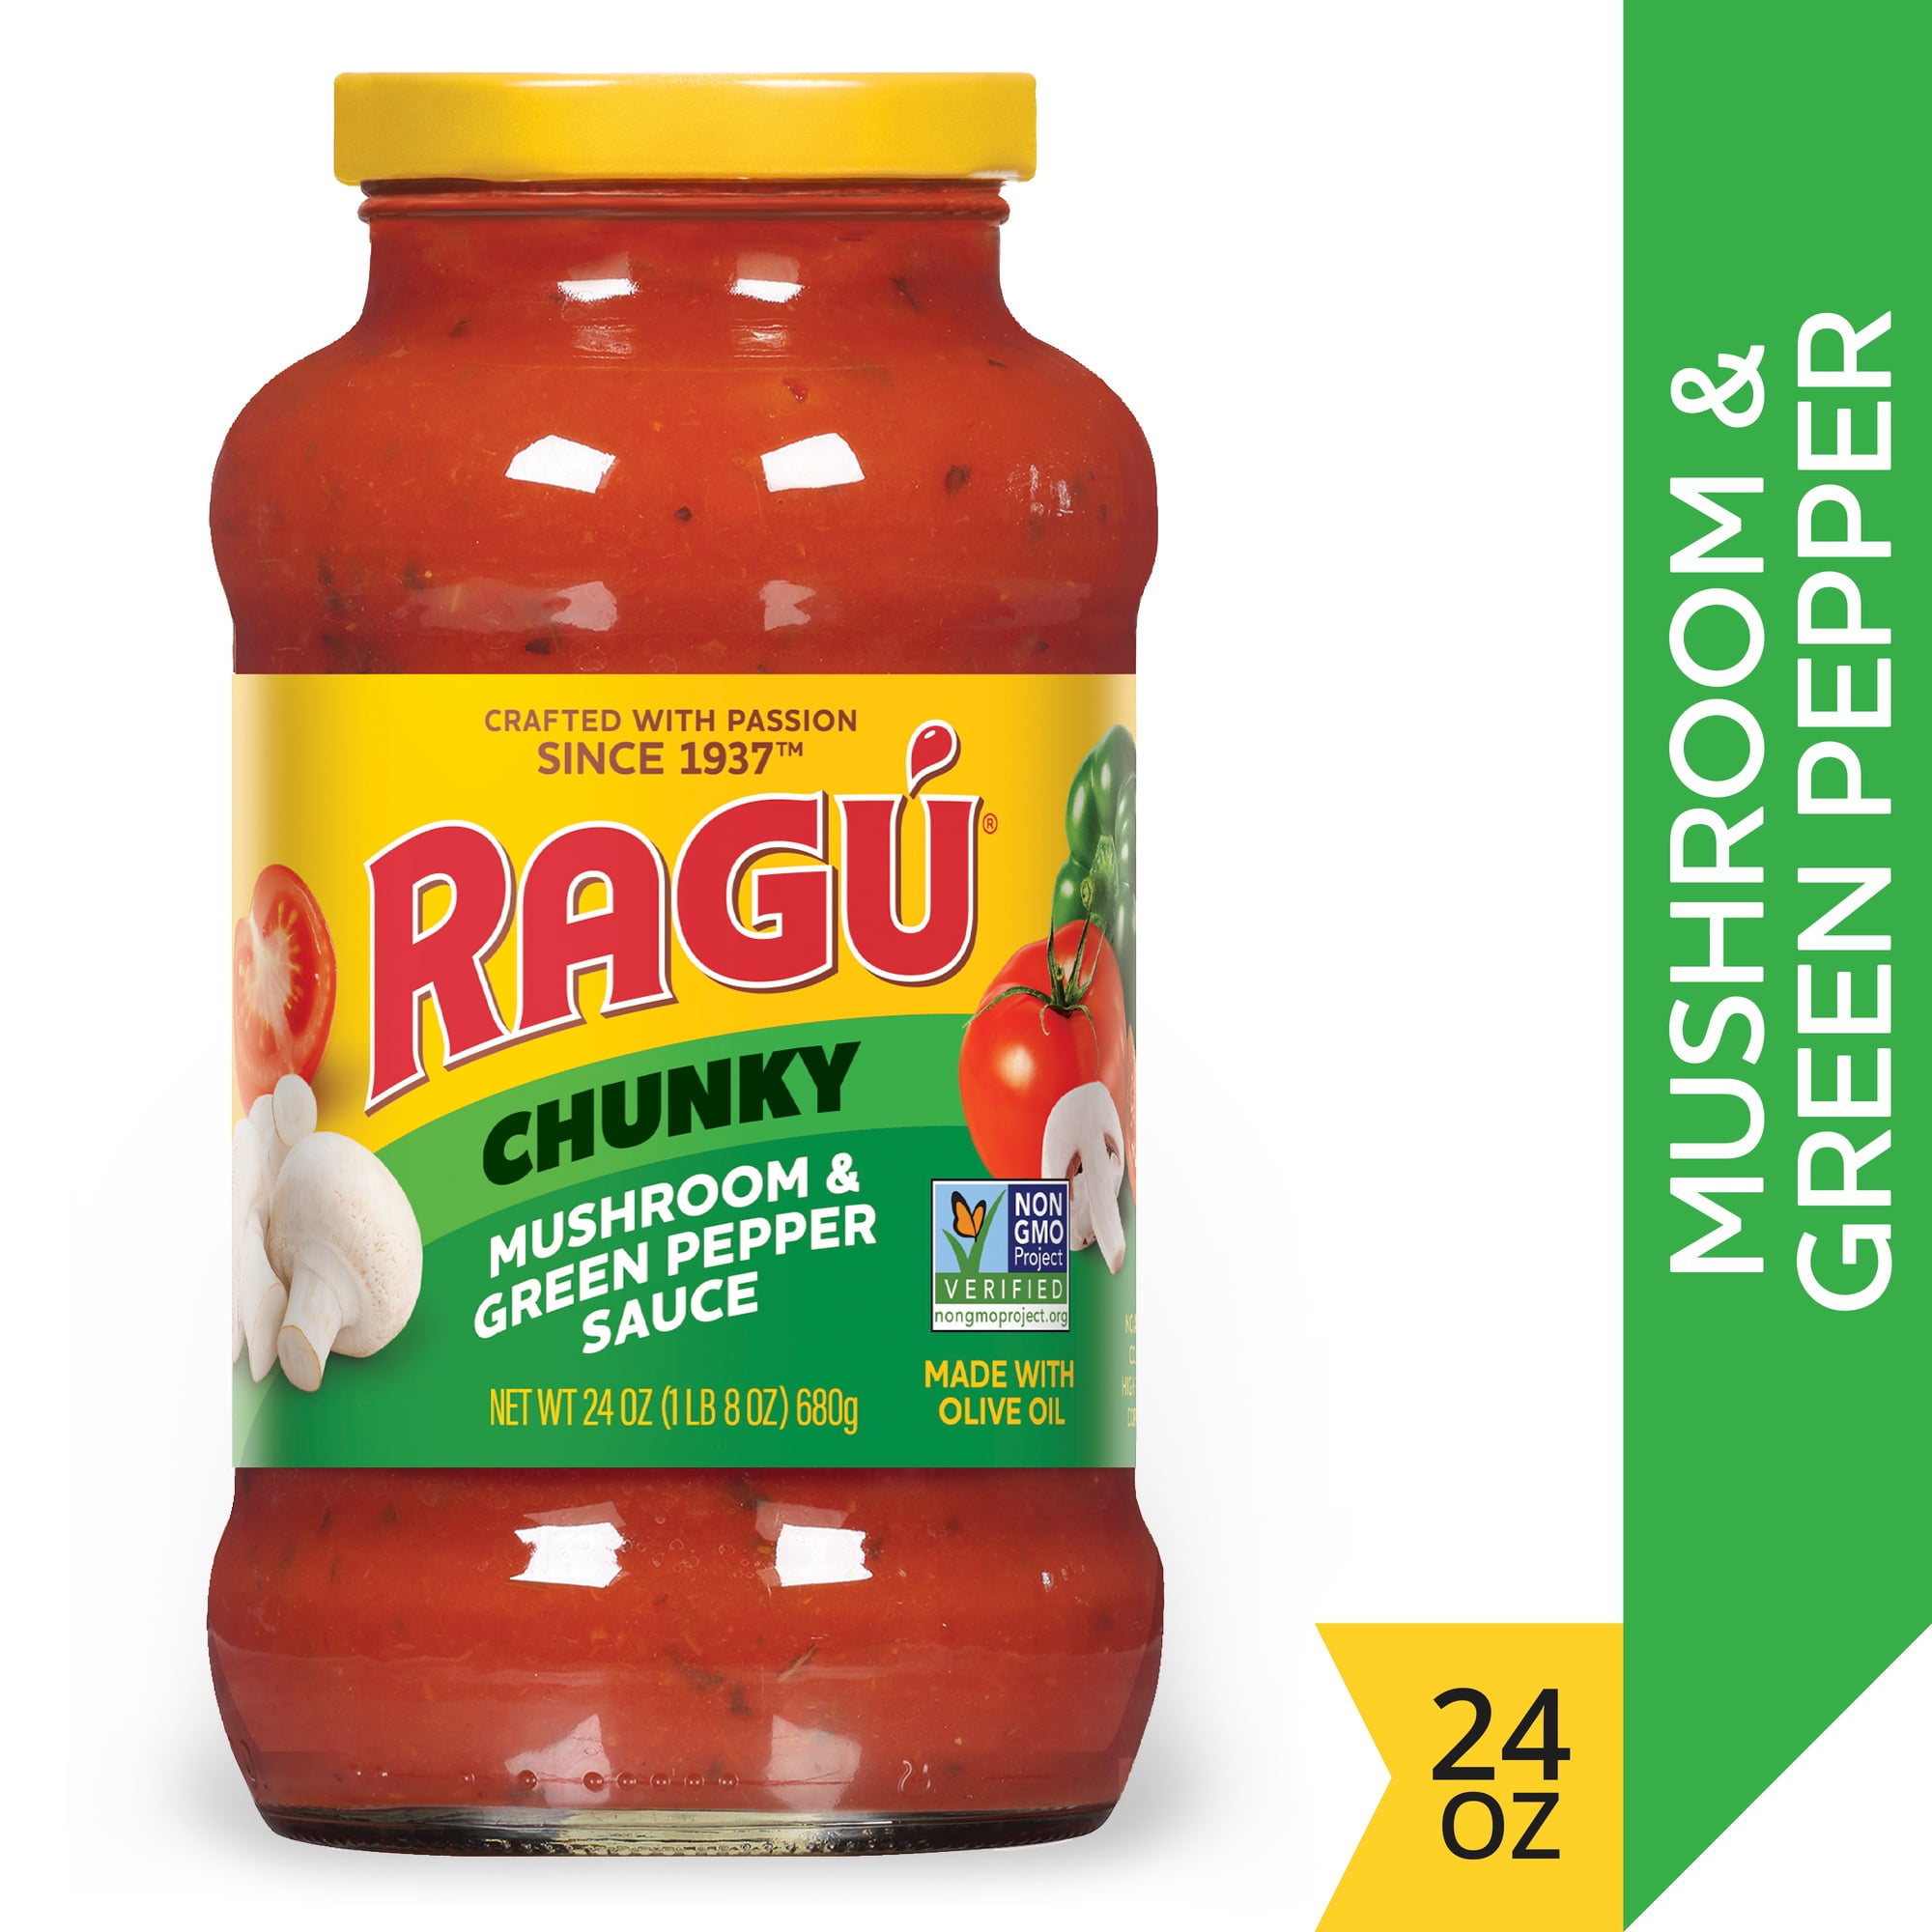 Ragu Chunky Mushroom and Green Pepper Pasta Sauce with Mushrooms, Green Peppers, Diced Tomatoes, and Italian Herbs and Spices, 24 OZ